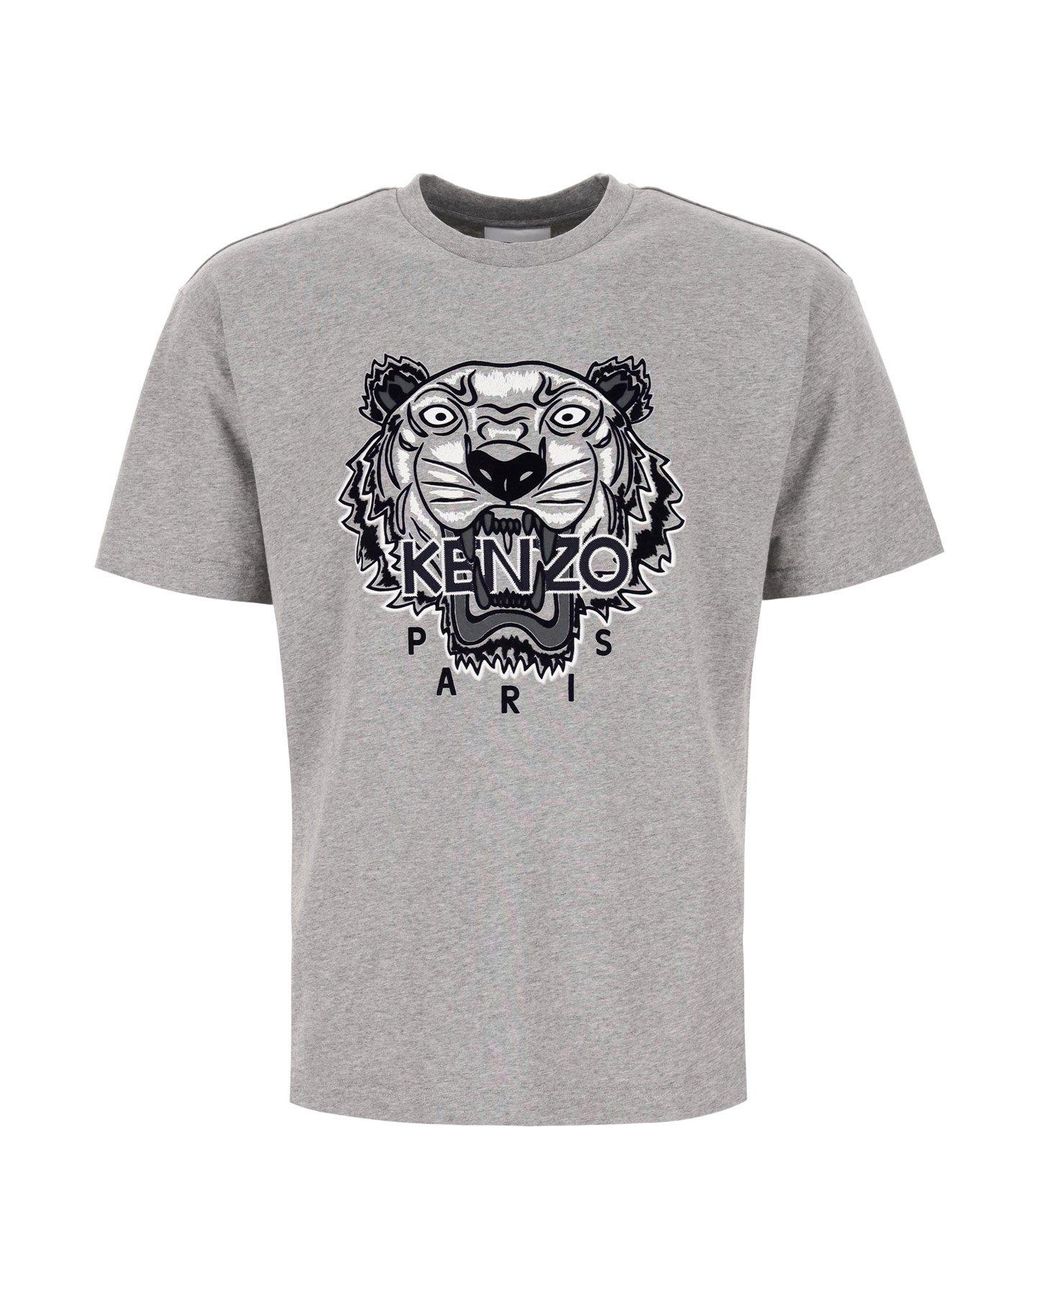 KENZO Cotton Tiger T-shirt in Grey (Gray) for Men - Save 3% - Lyst